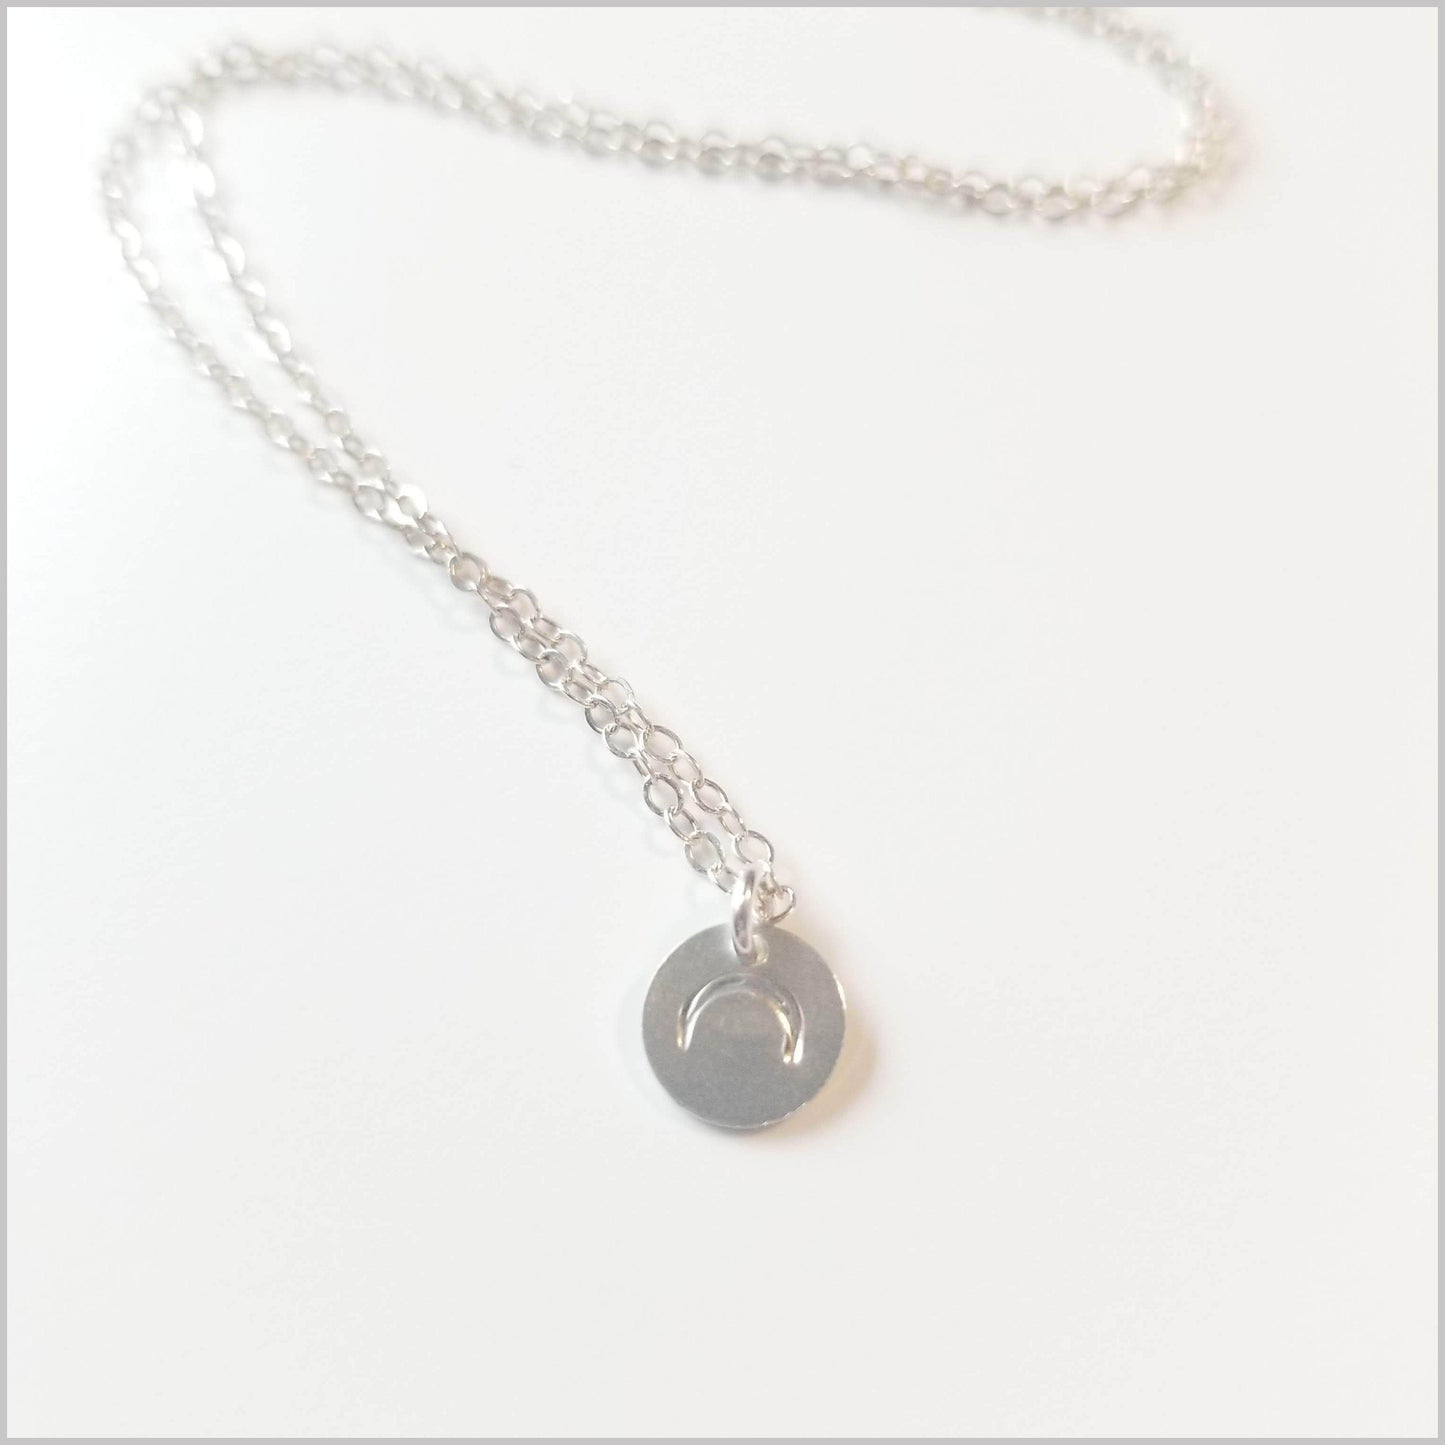 Live Free Crescent Moon Necklace